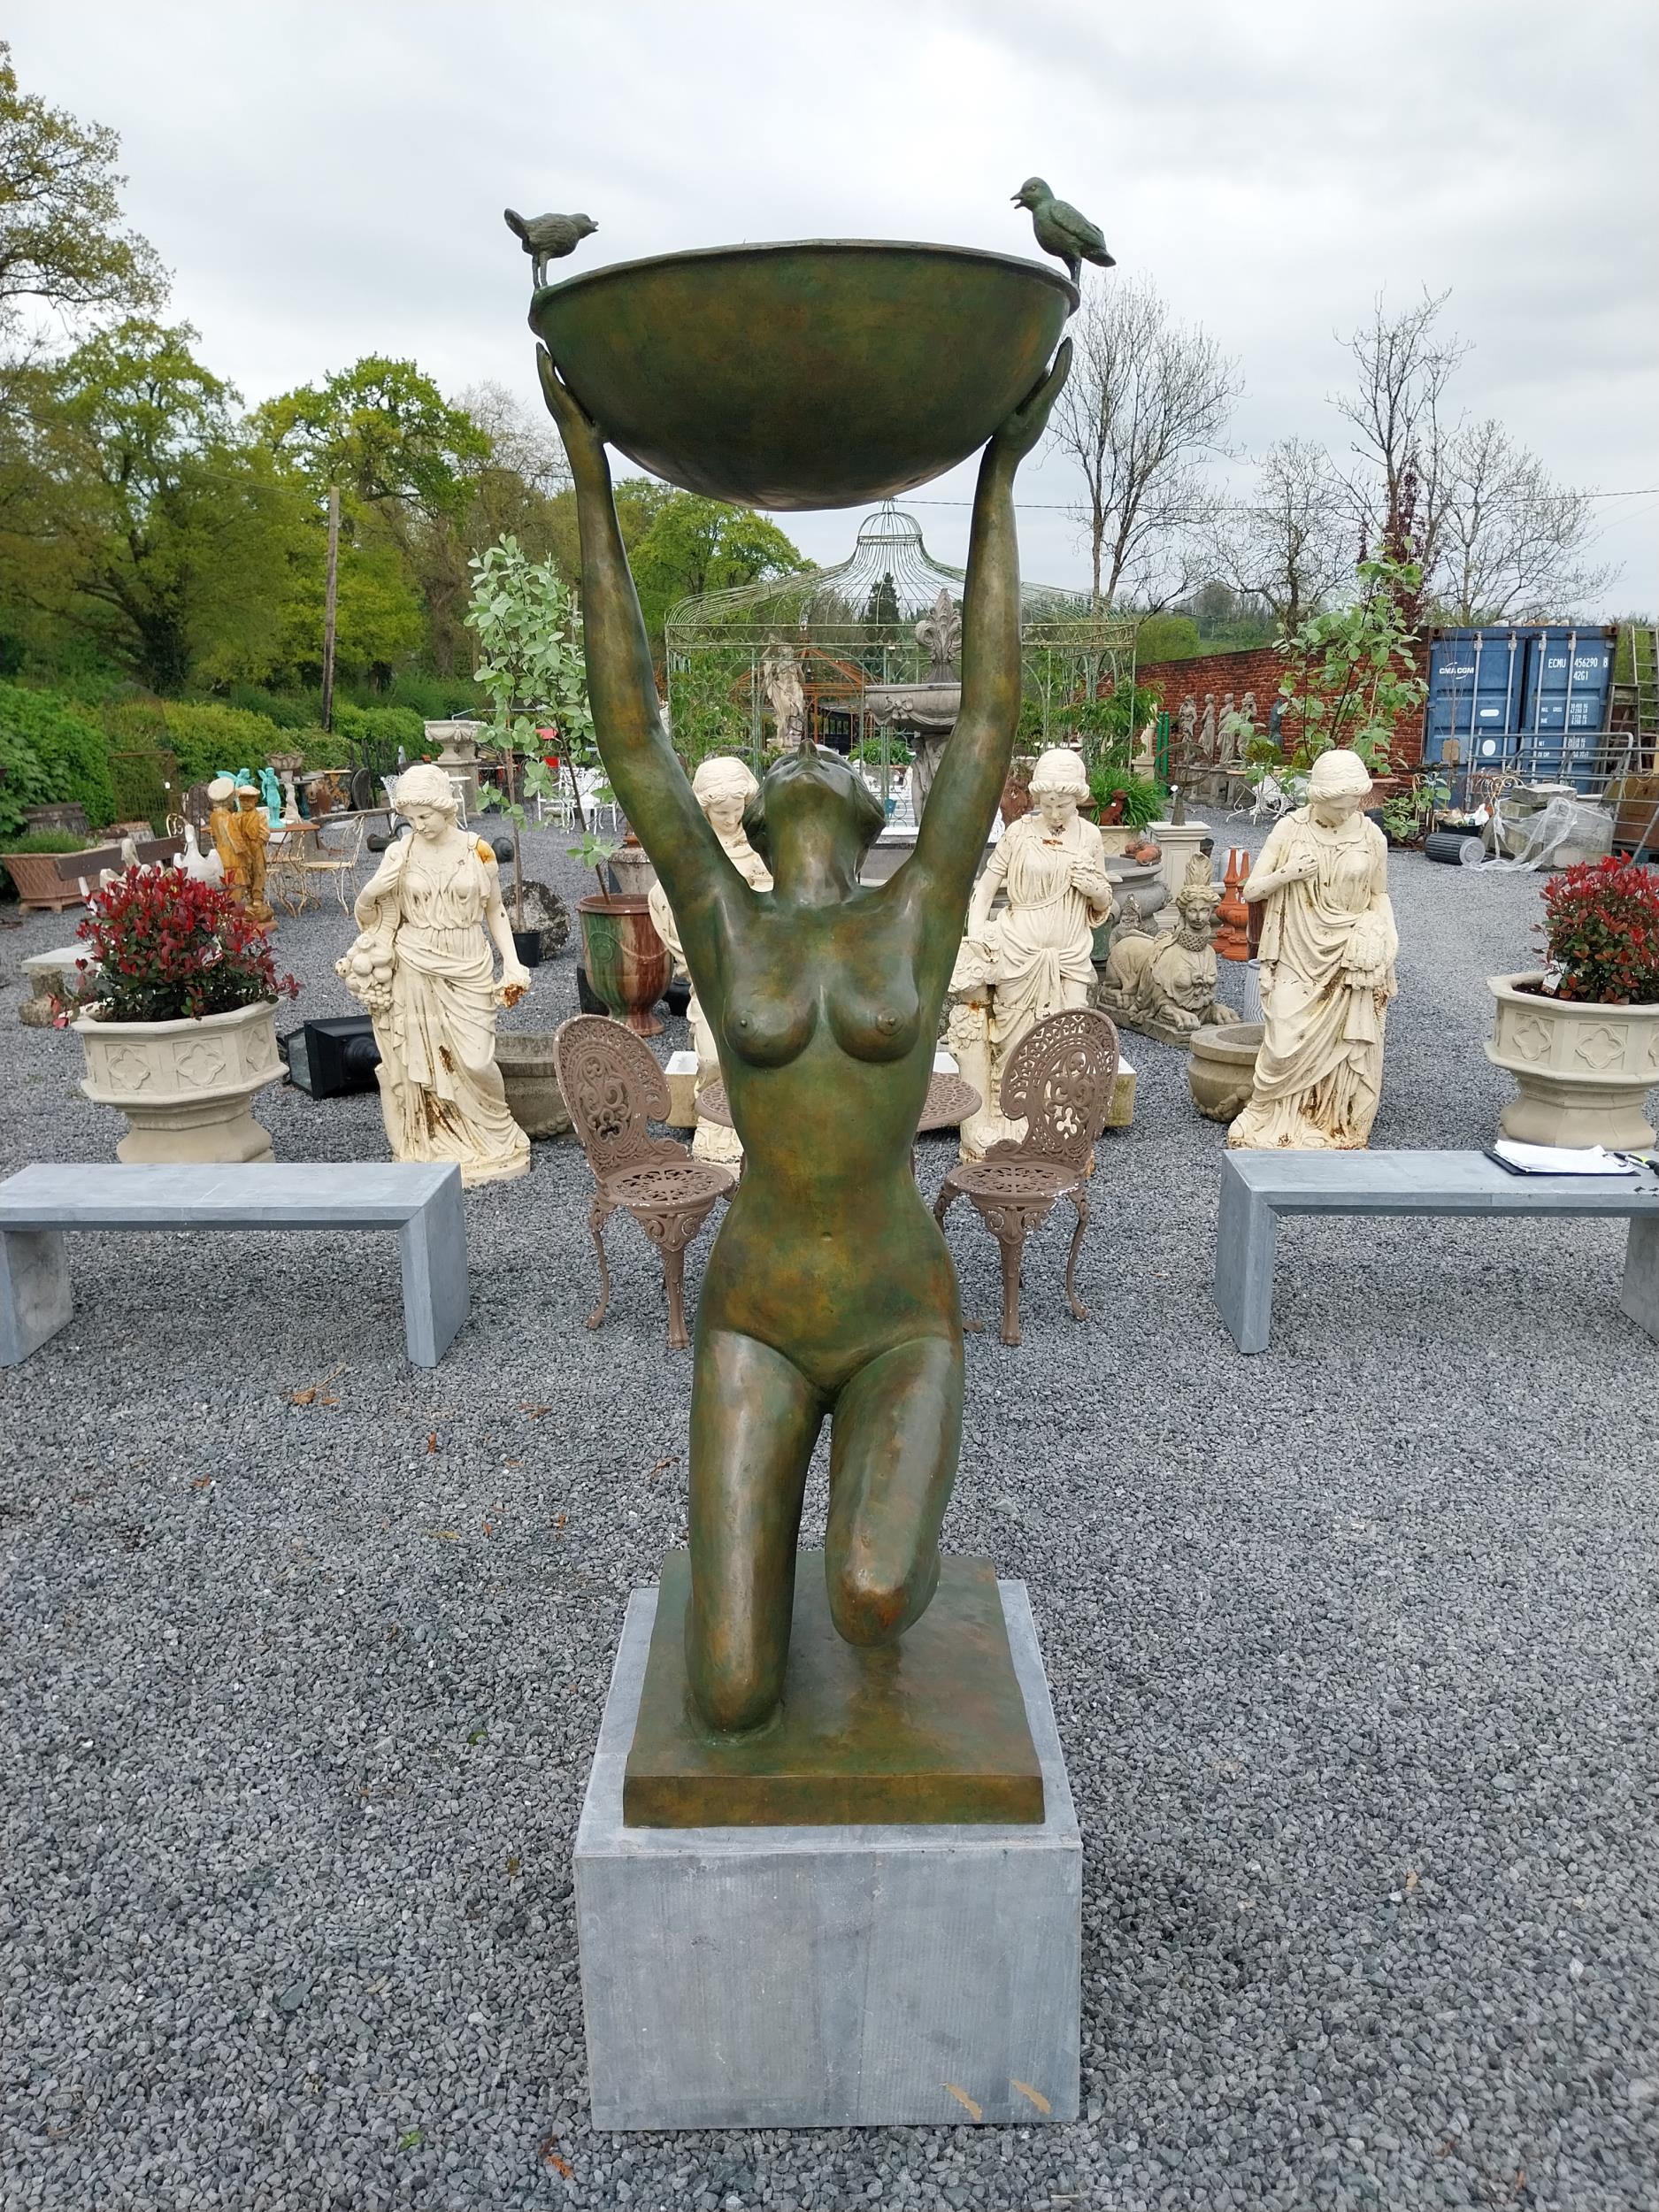 Exceptional quality bronze water feature or bird bath depicting an Art Deco lady raised on slate